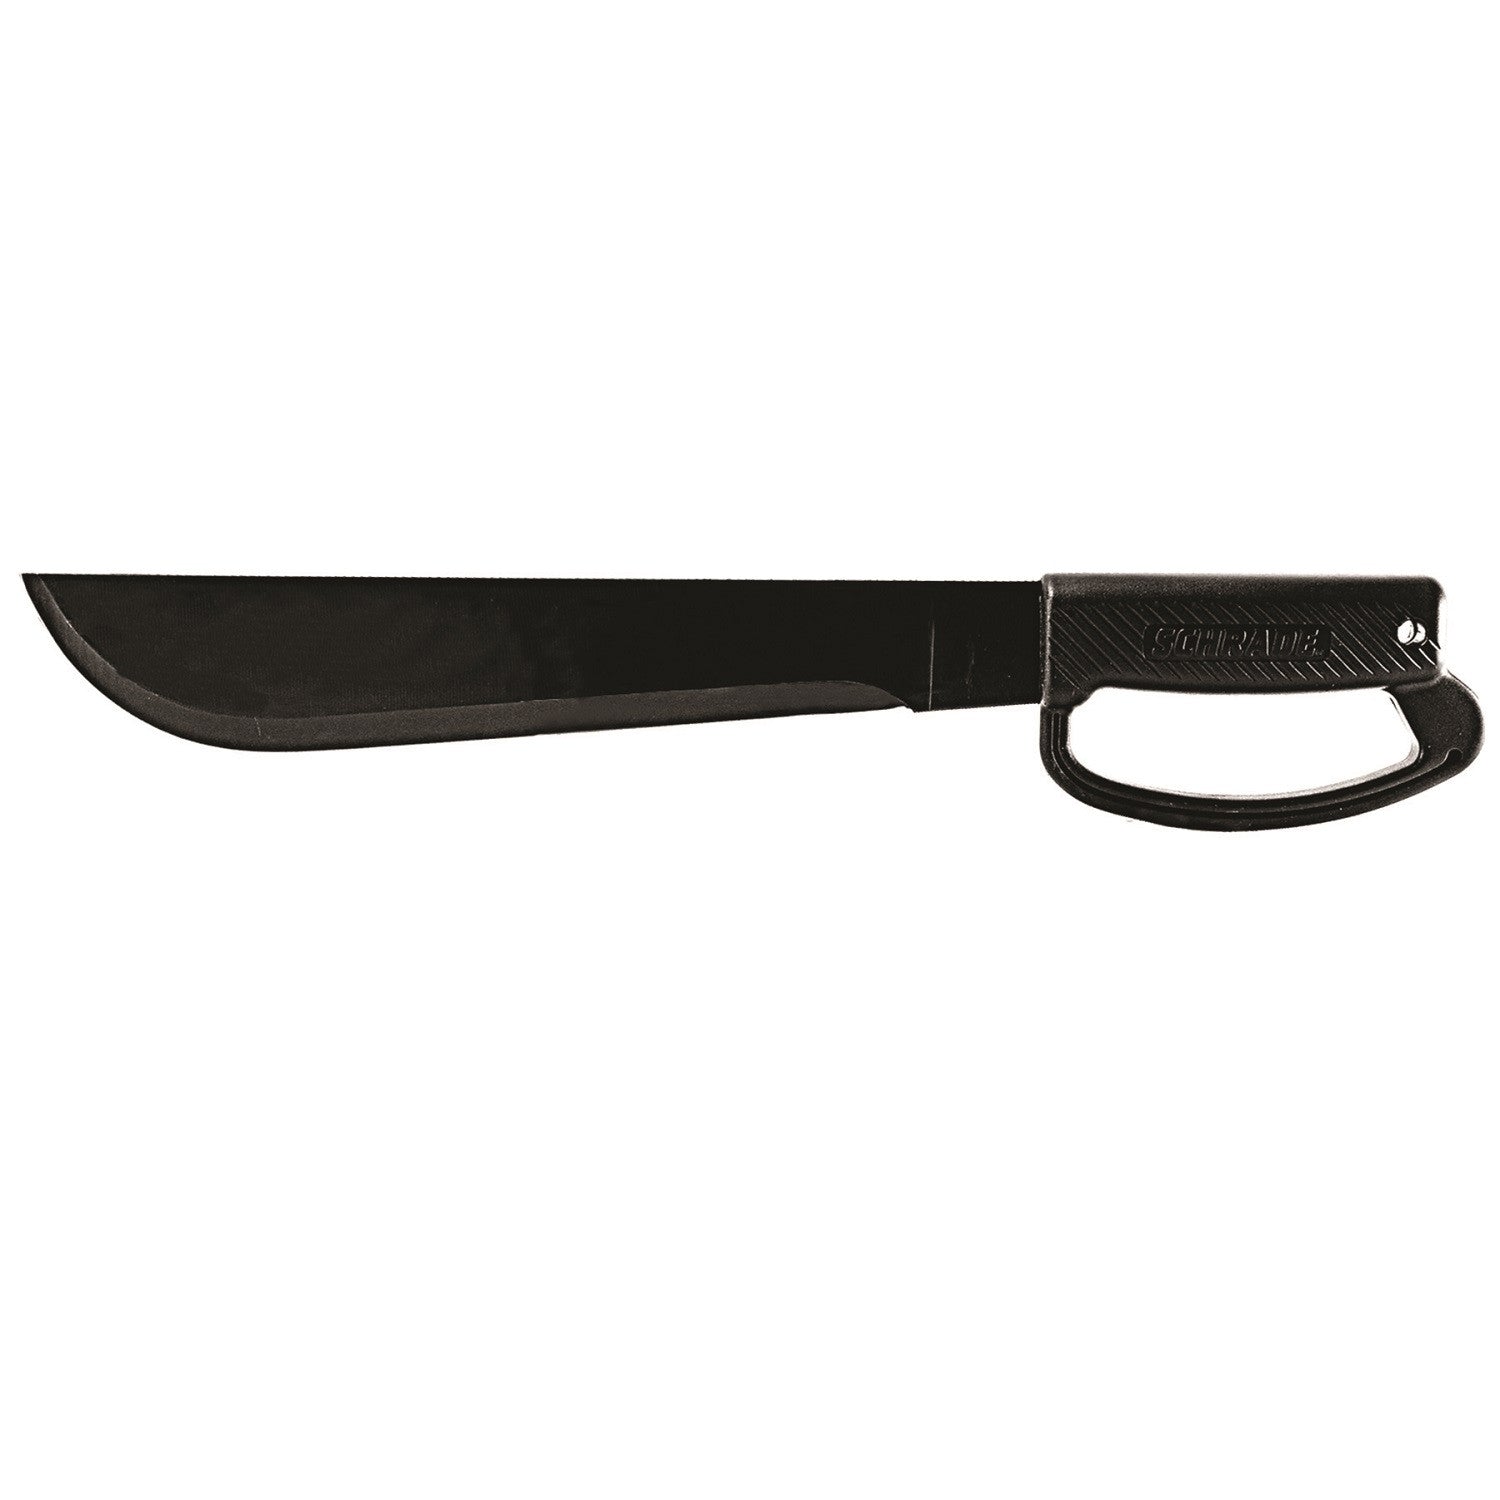 Aussie Outback Supplies - Monday Machete Madness Make sure you stock up and  have a machete for the apocalypse. Sizes vary from 10” - 22” length. These  amazing Fixed Blade Knives from